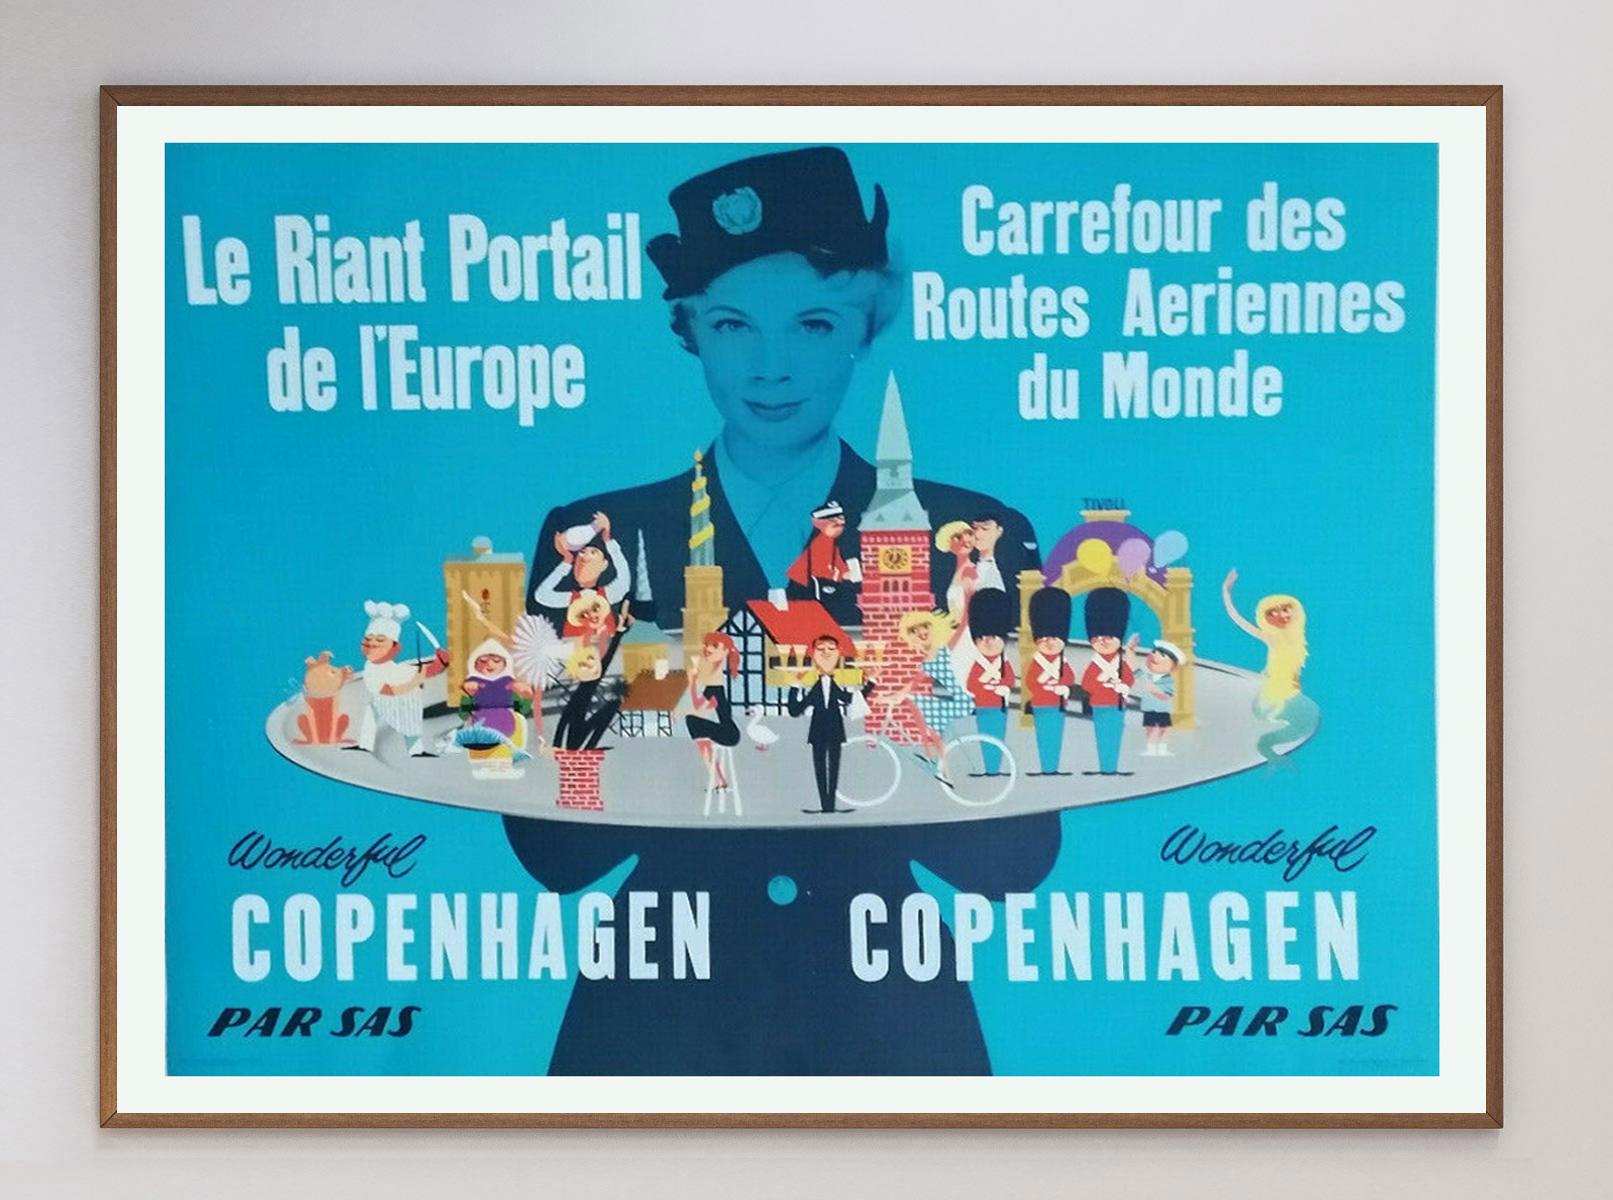 With vibrant colour and fun design, this stunning poster was created in 1956 by SAS Scandinavian Airlines to promote routes to Copenhagen, Denmark or 